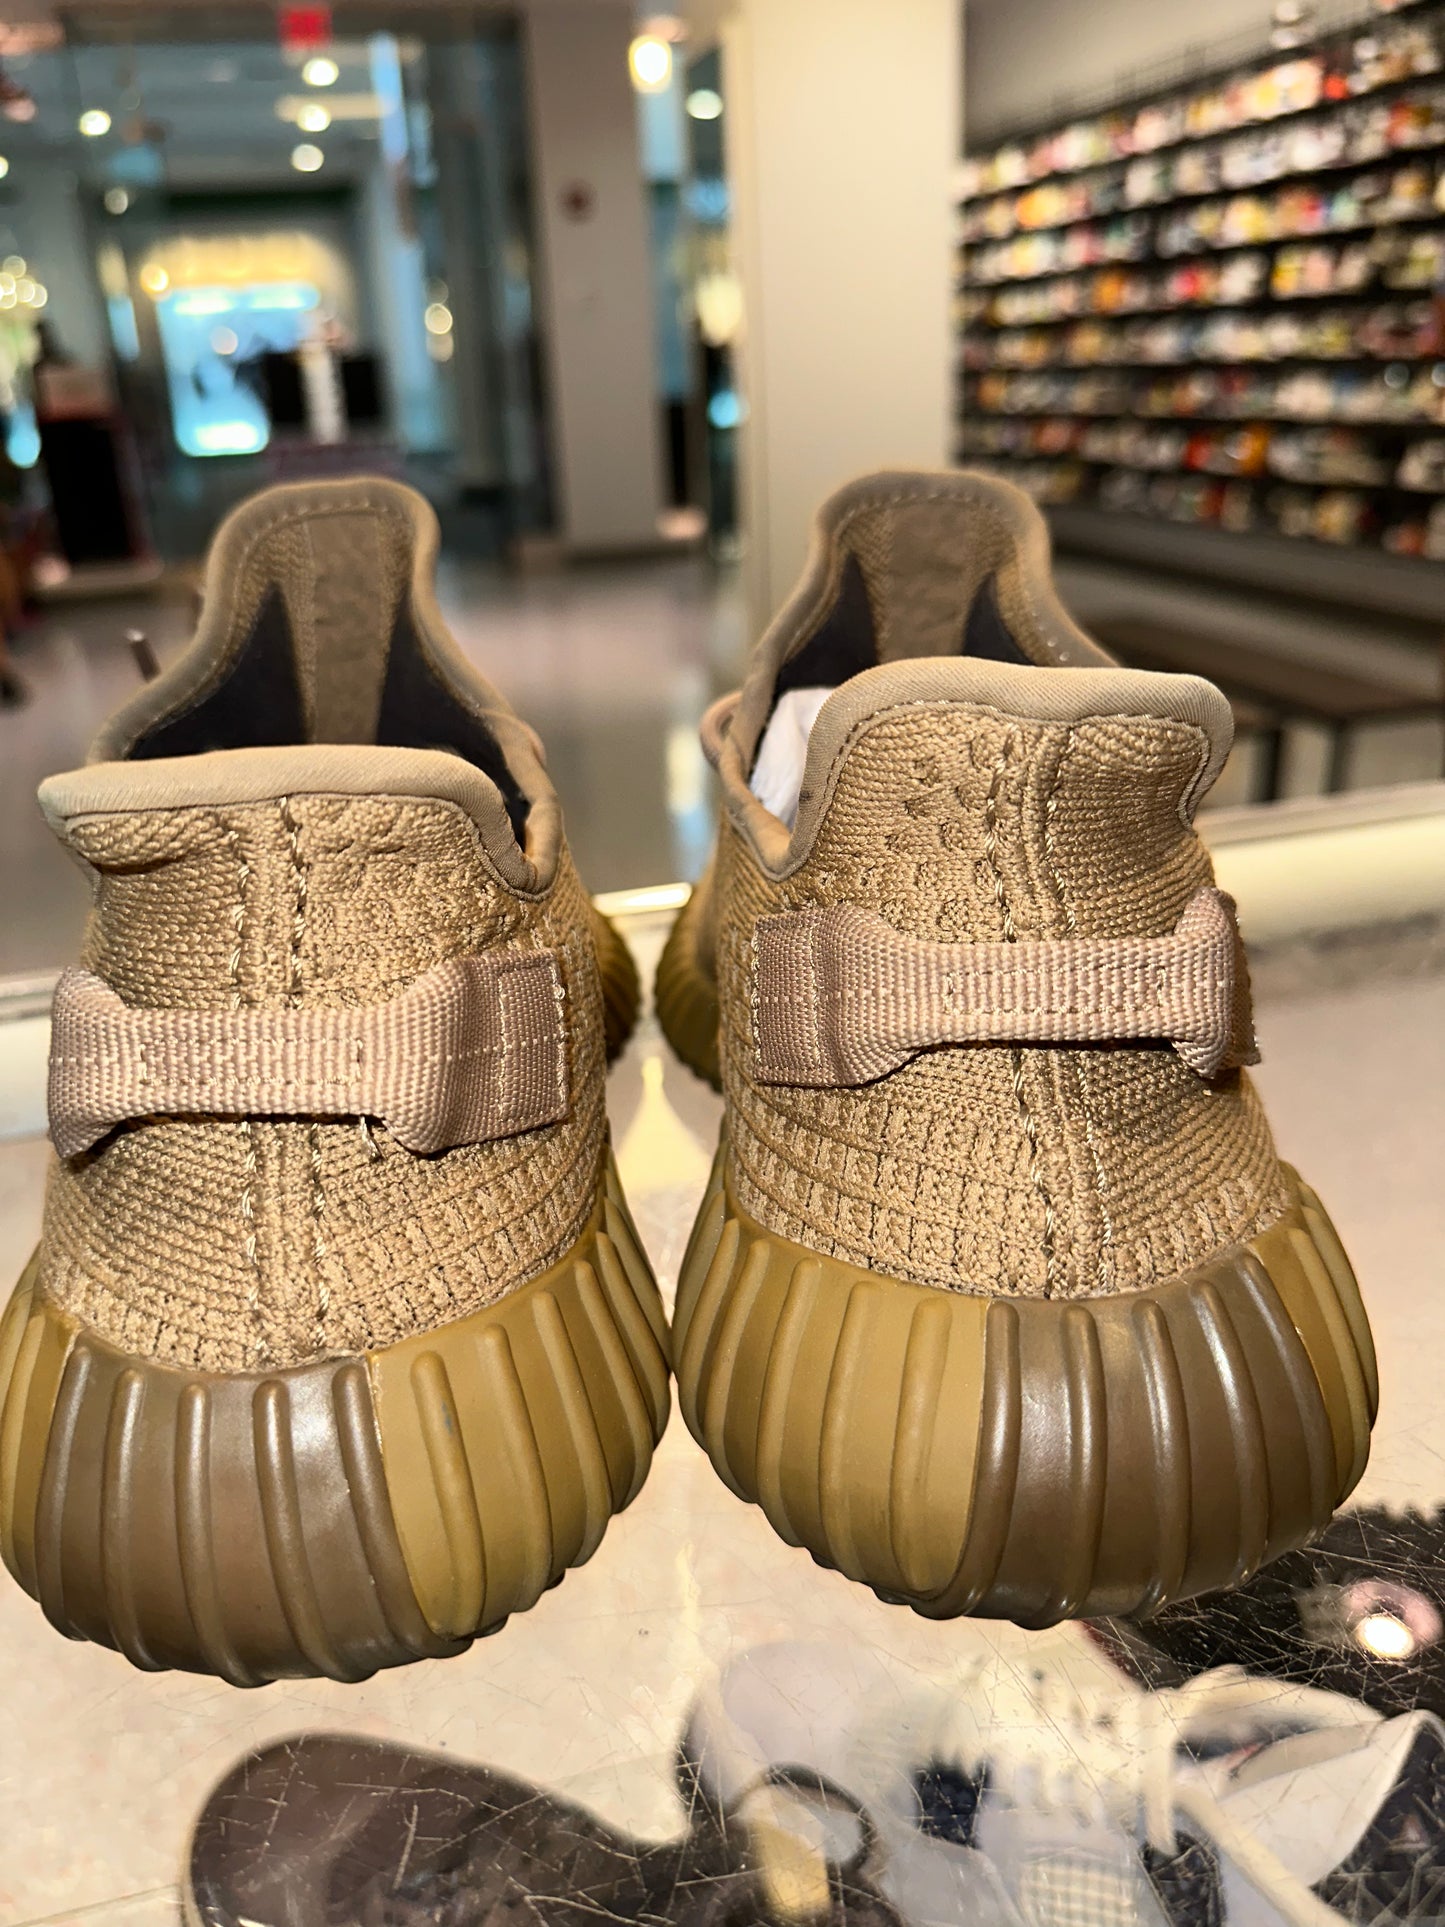 Size 9.5 Adidas Yeezy Boost 350 V2 “Earth” (Mall)